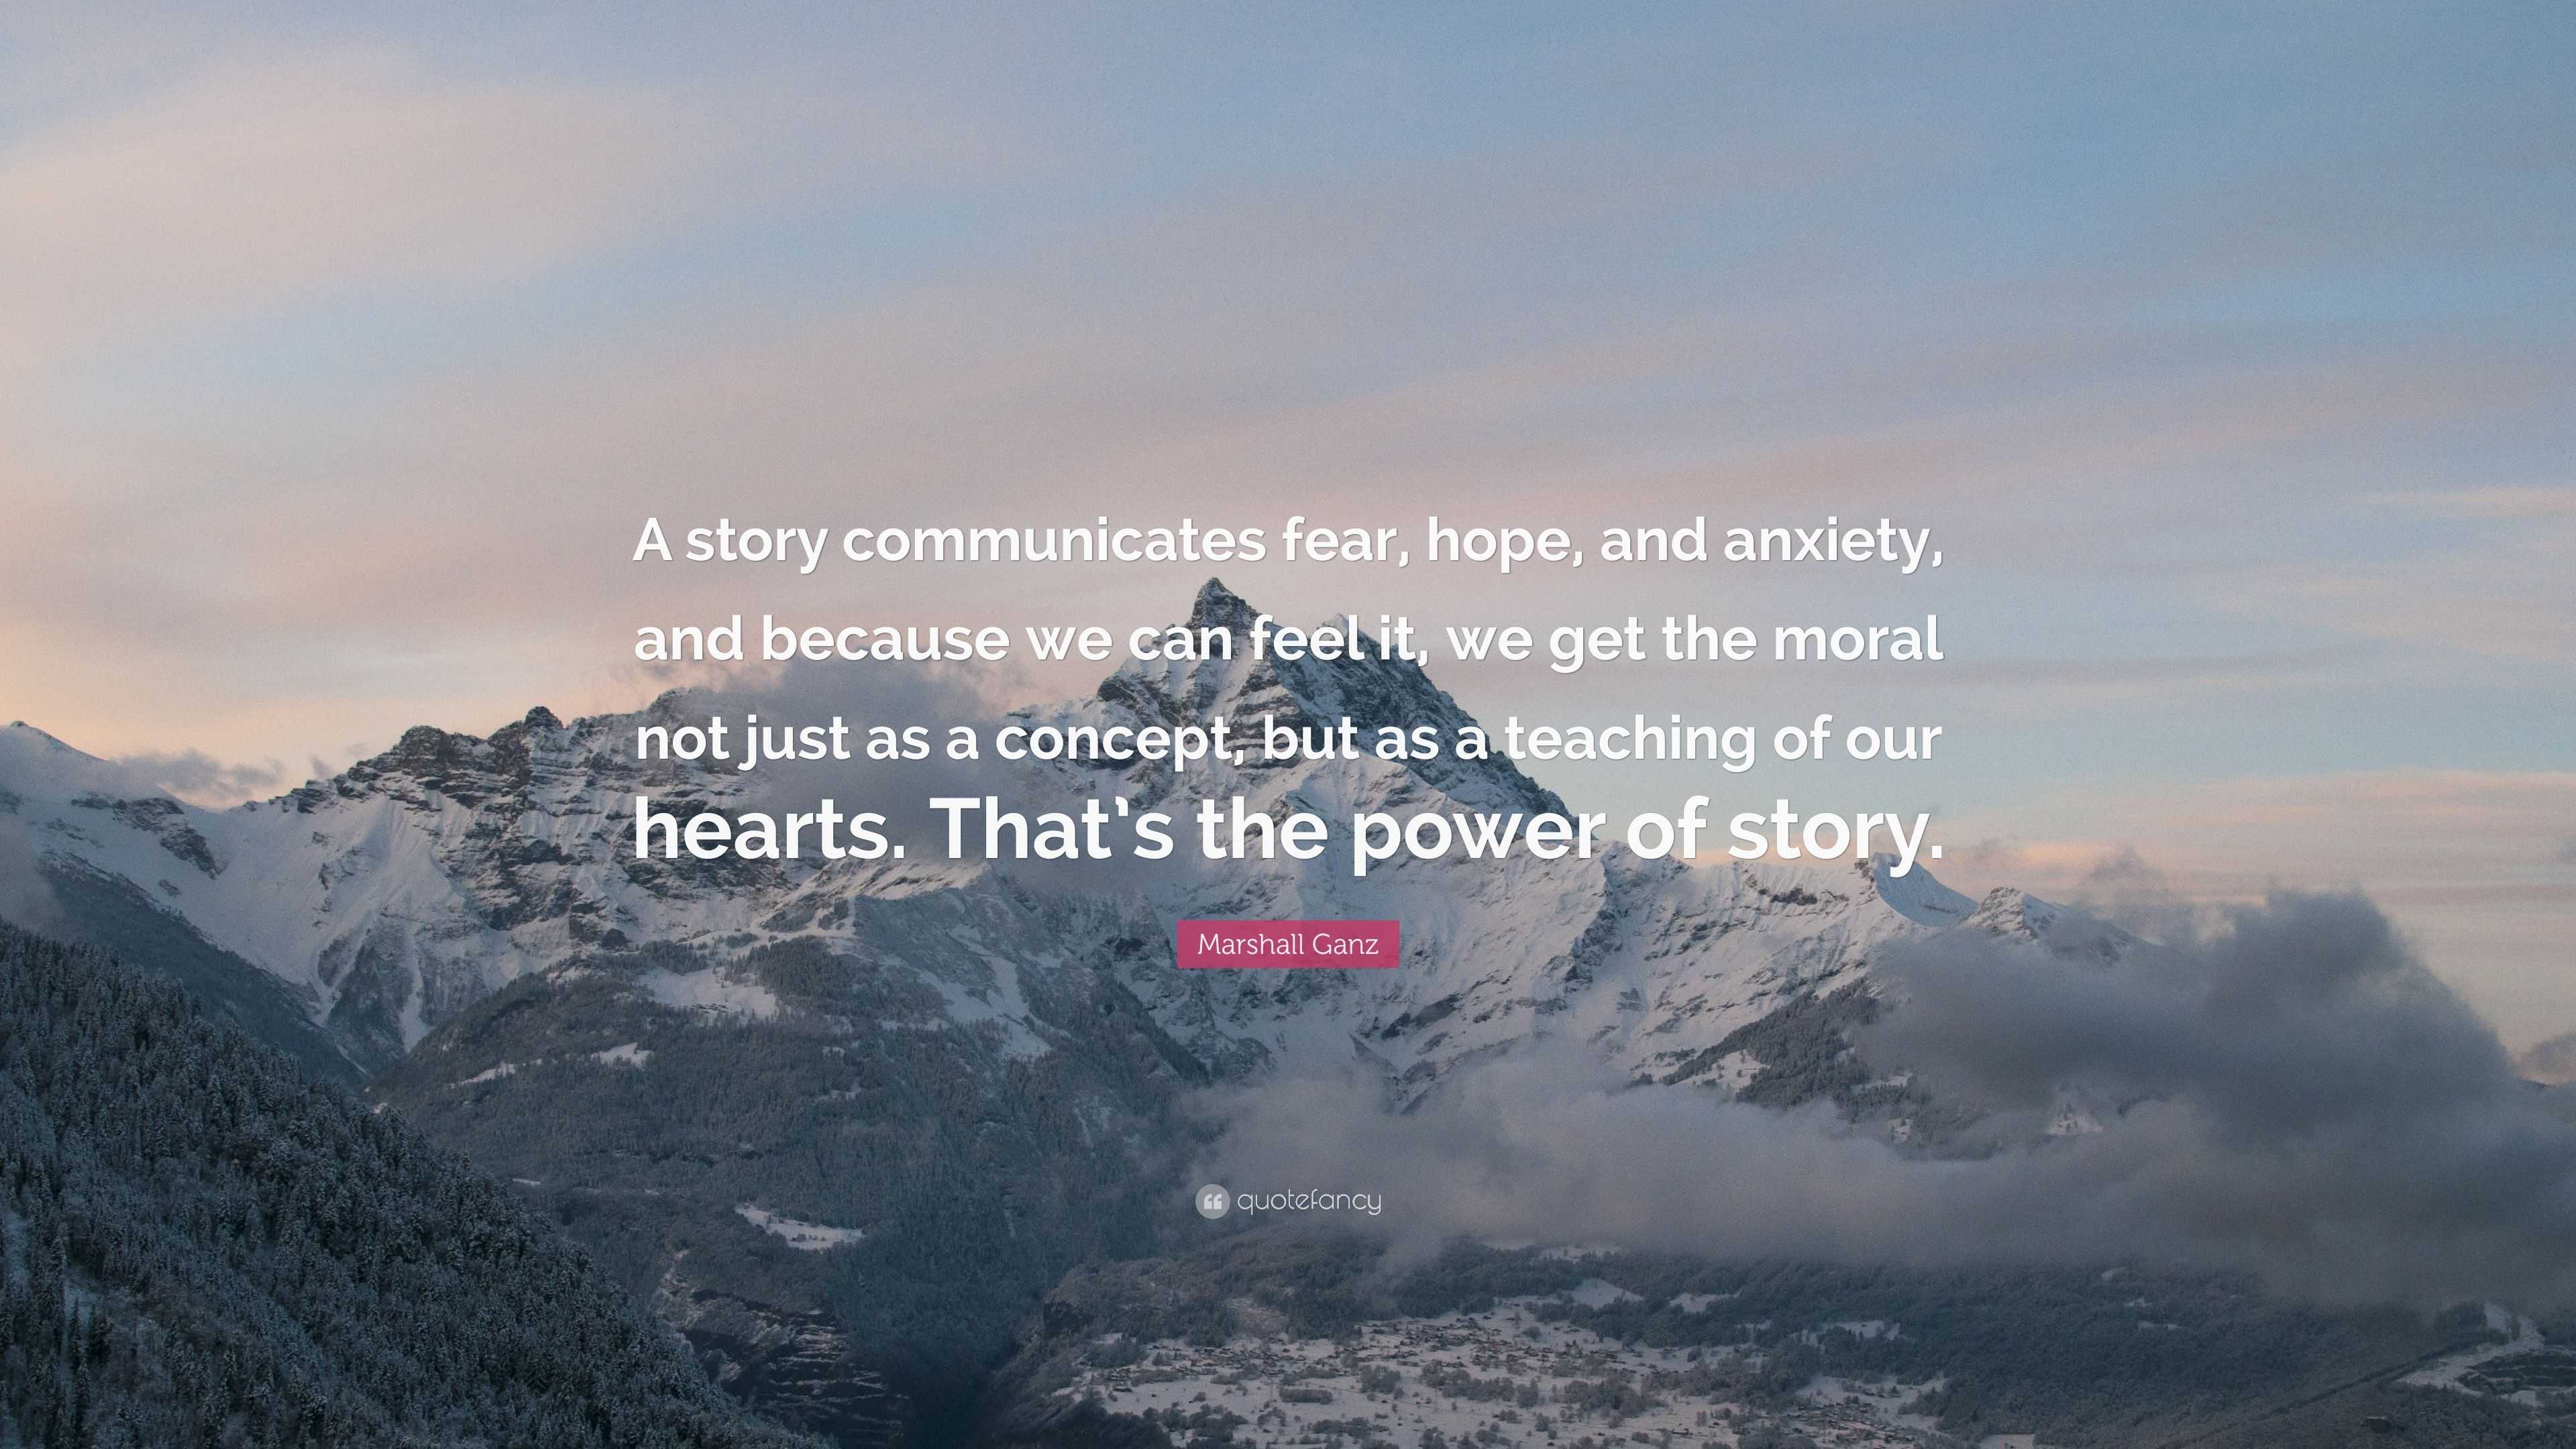 Marshall Ganz Quote: “A story communicates fear, hope, and anxiety, and ...